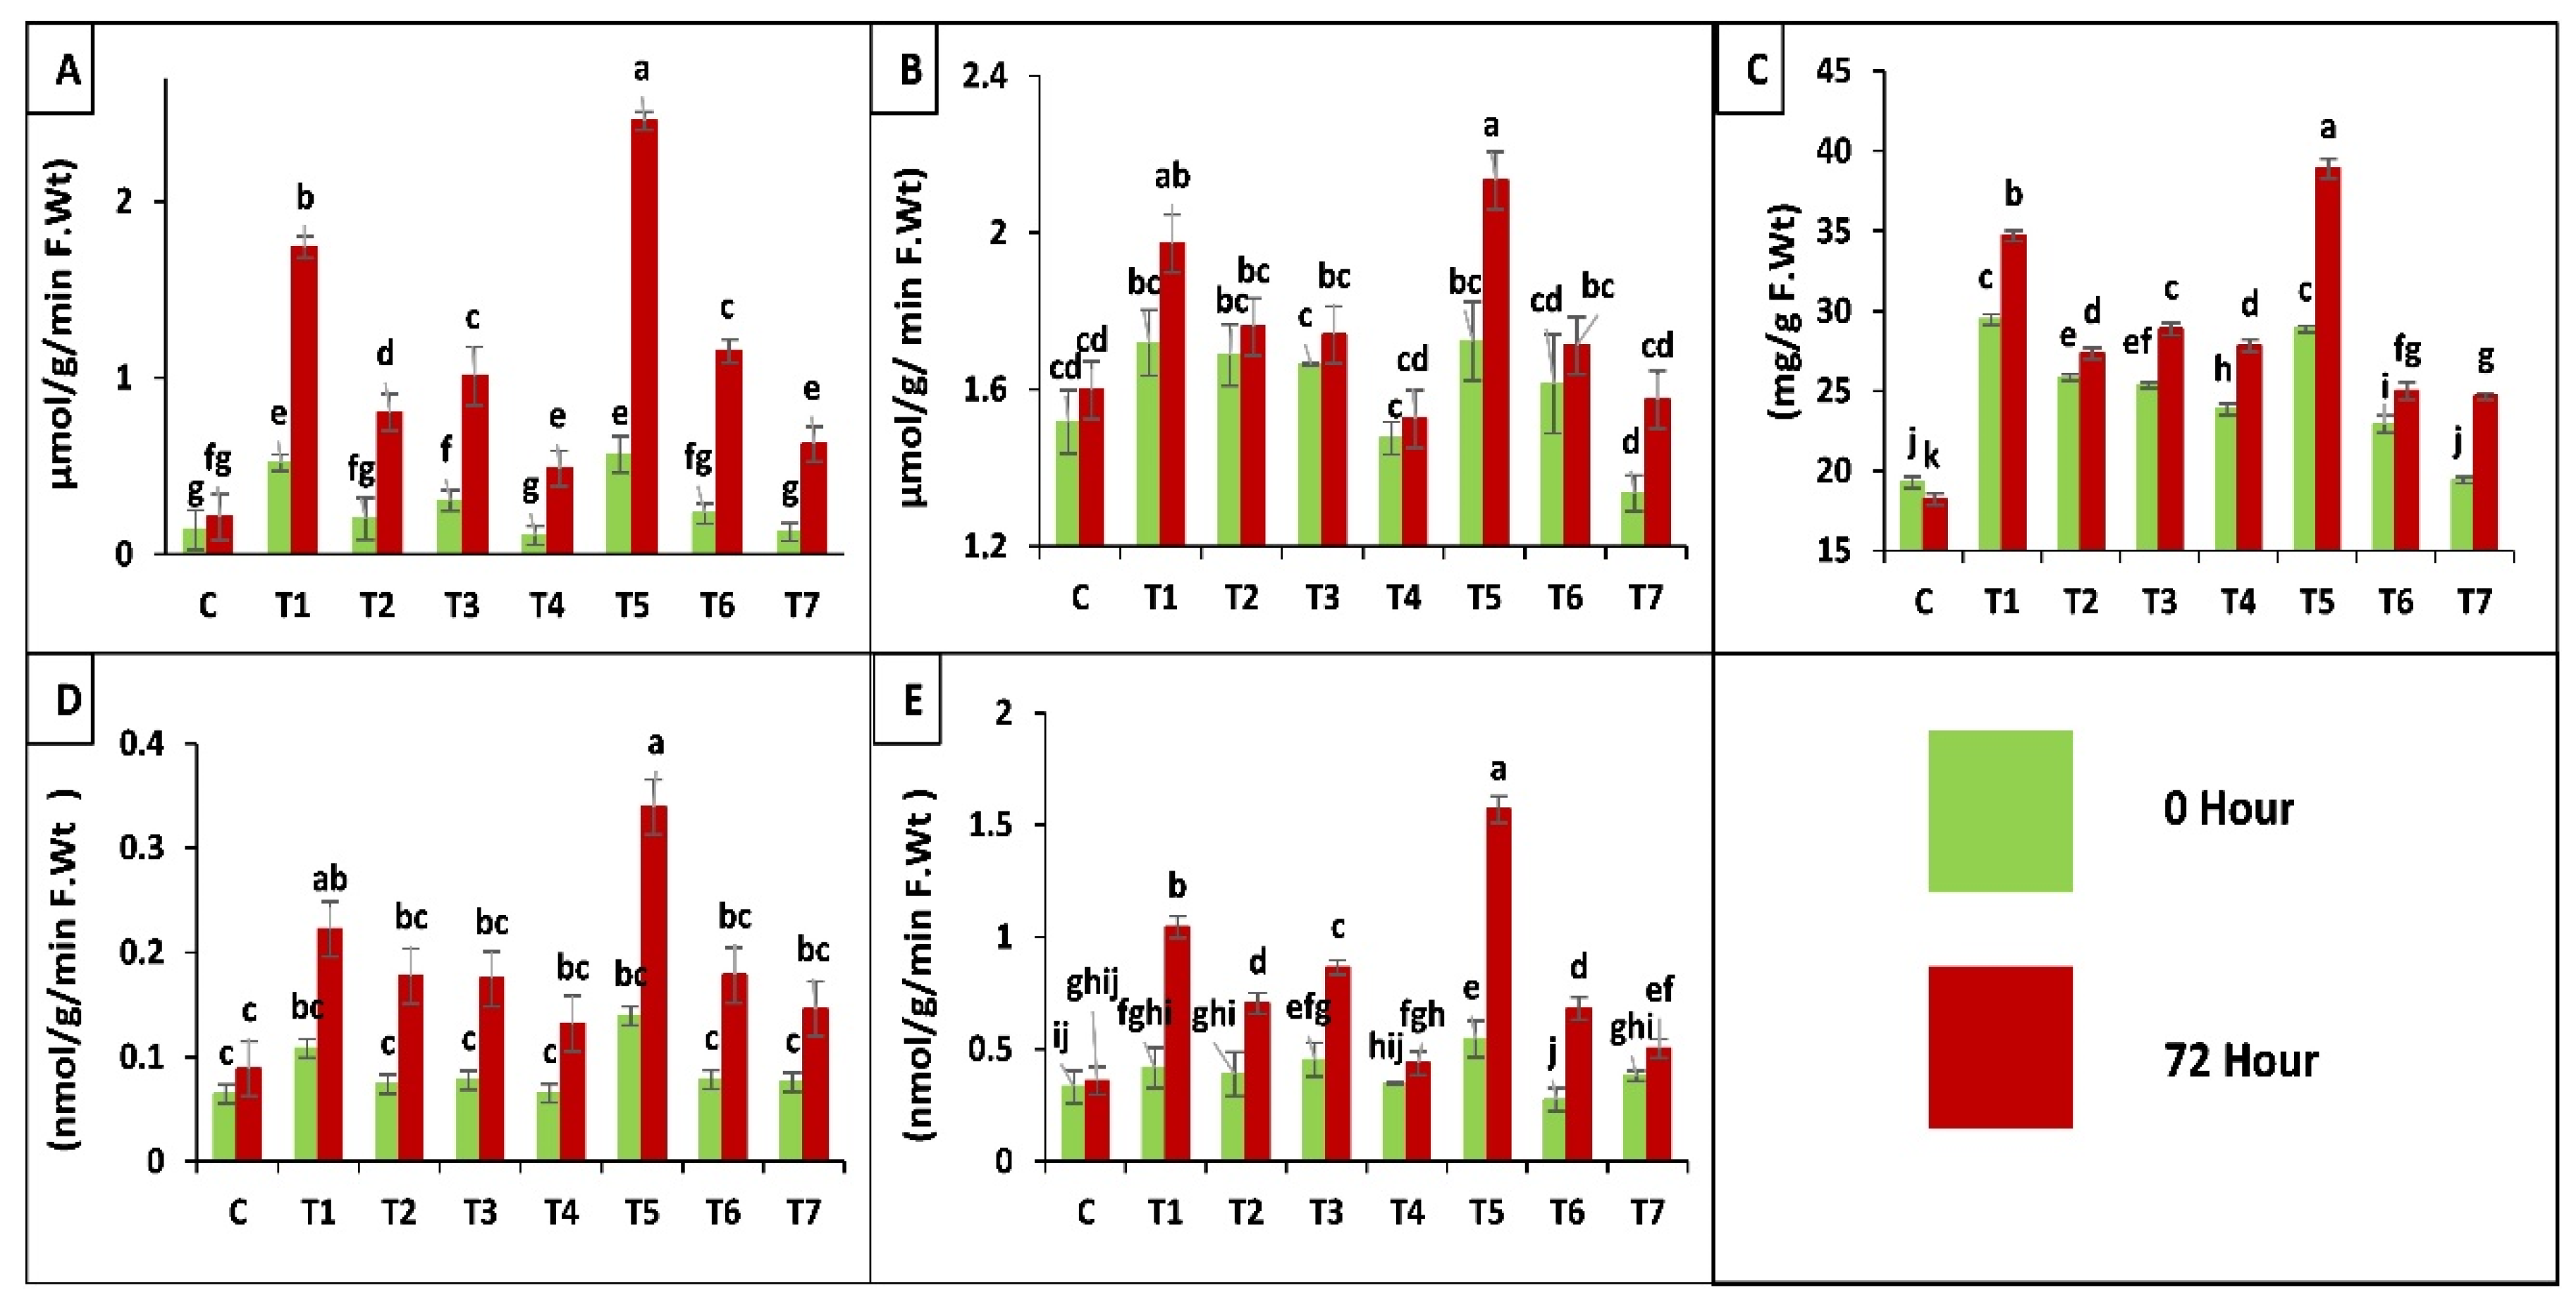 Ijms Free Full Text Synergistic Effect Of Beauveria Bassiana And Trichoderma Asperellum To Induce Maize Zea Mays L Defense Against The Asian Corn Borer Ostrinia Furnacalis Lepidoptera Crambidae And Larval Immune